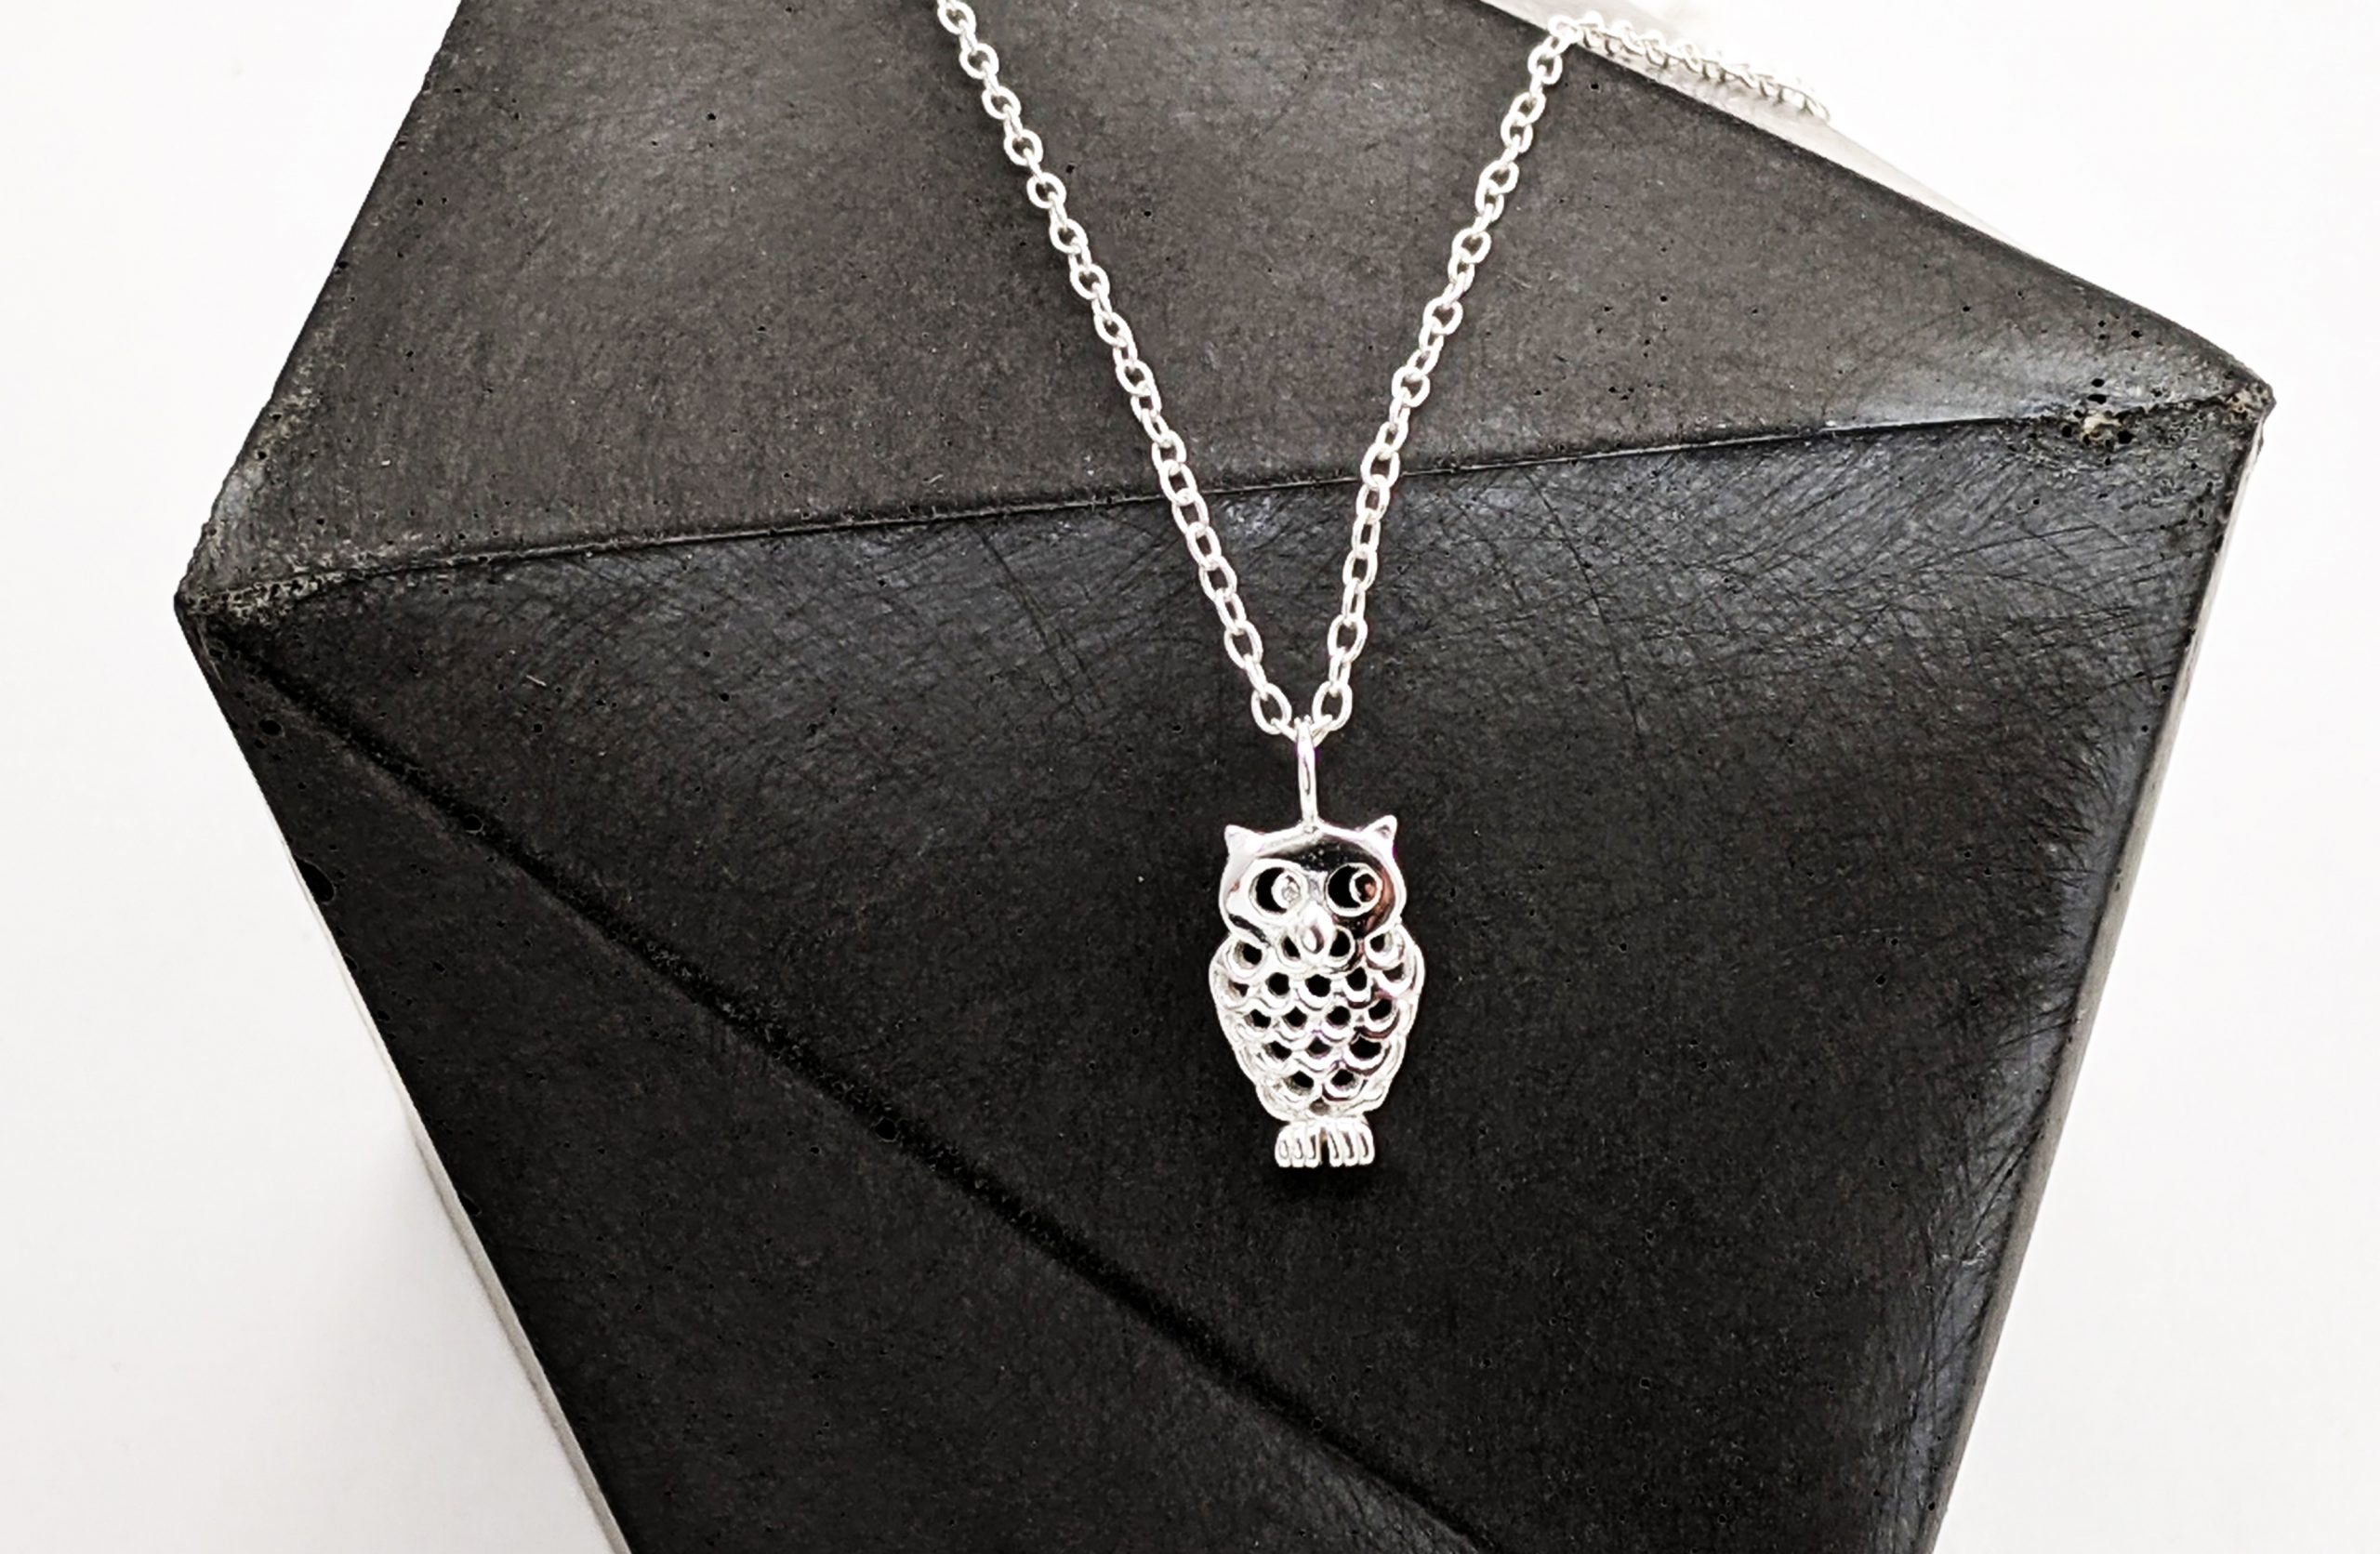 Sterling Silver Pendant with Solid 925 Silver Chain for Men and Women Silver Jewellery by Florin & Finch Silver Hamsa Charm Silver Necklace